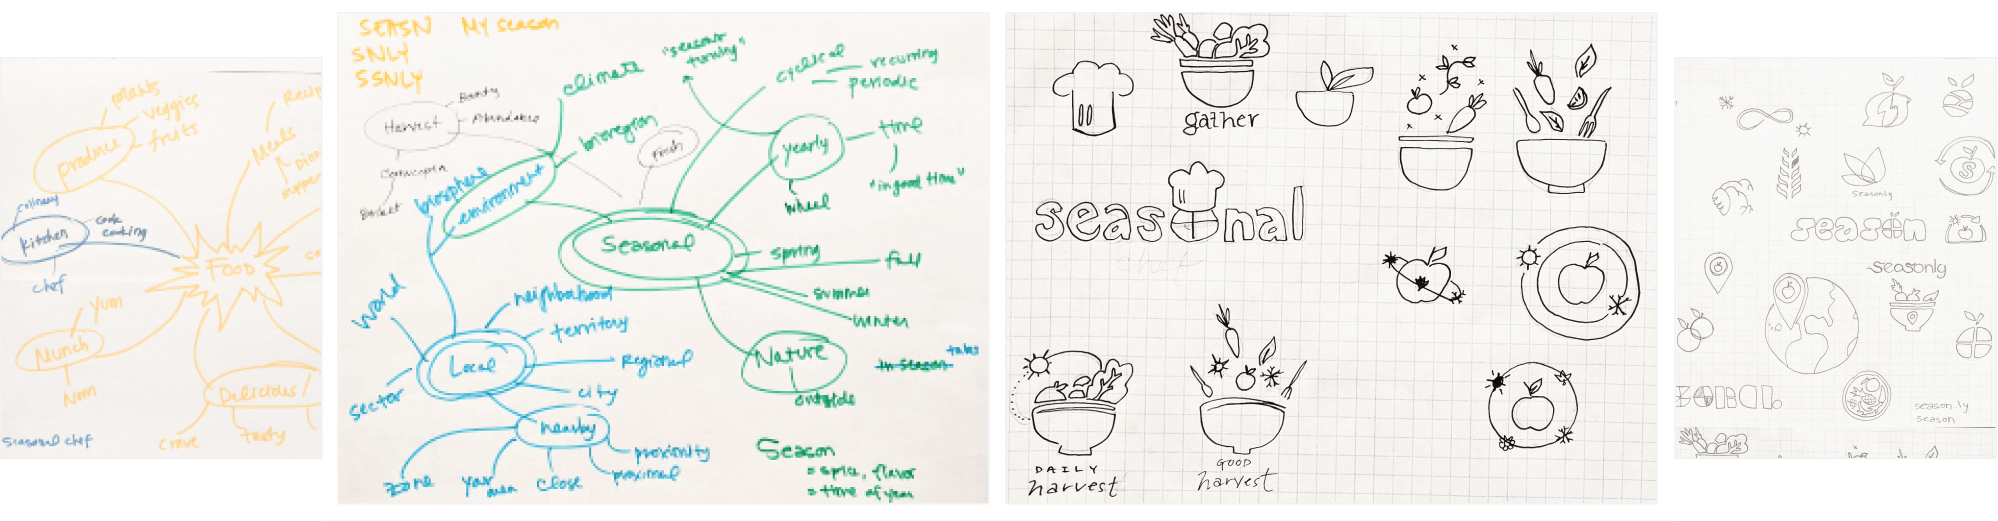 early logo sketches and a mind map of brand name ideas